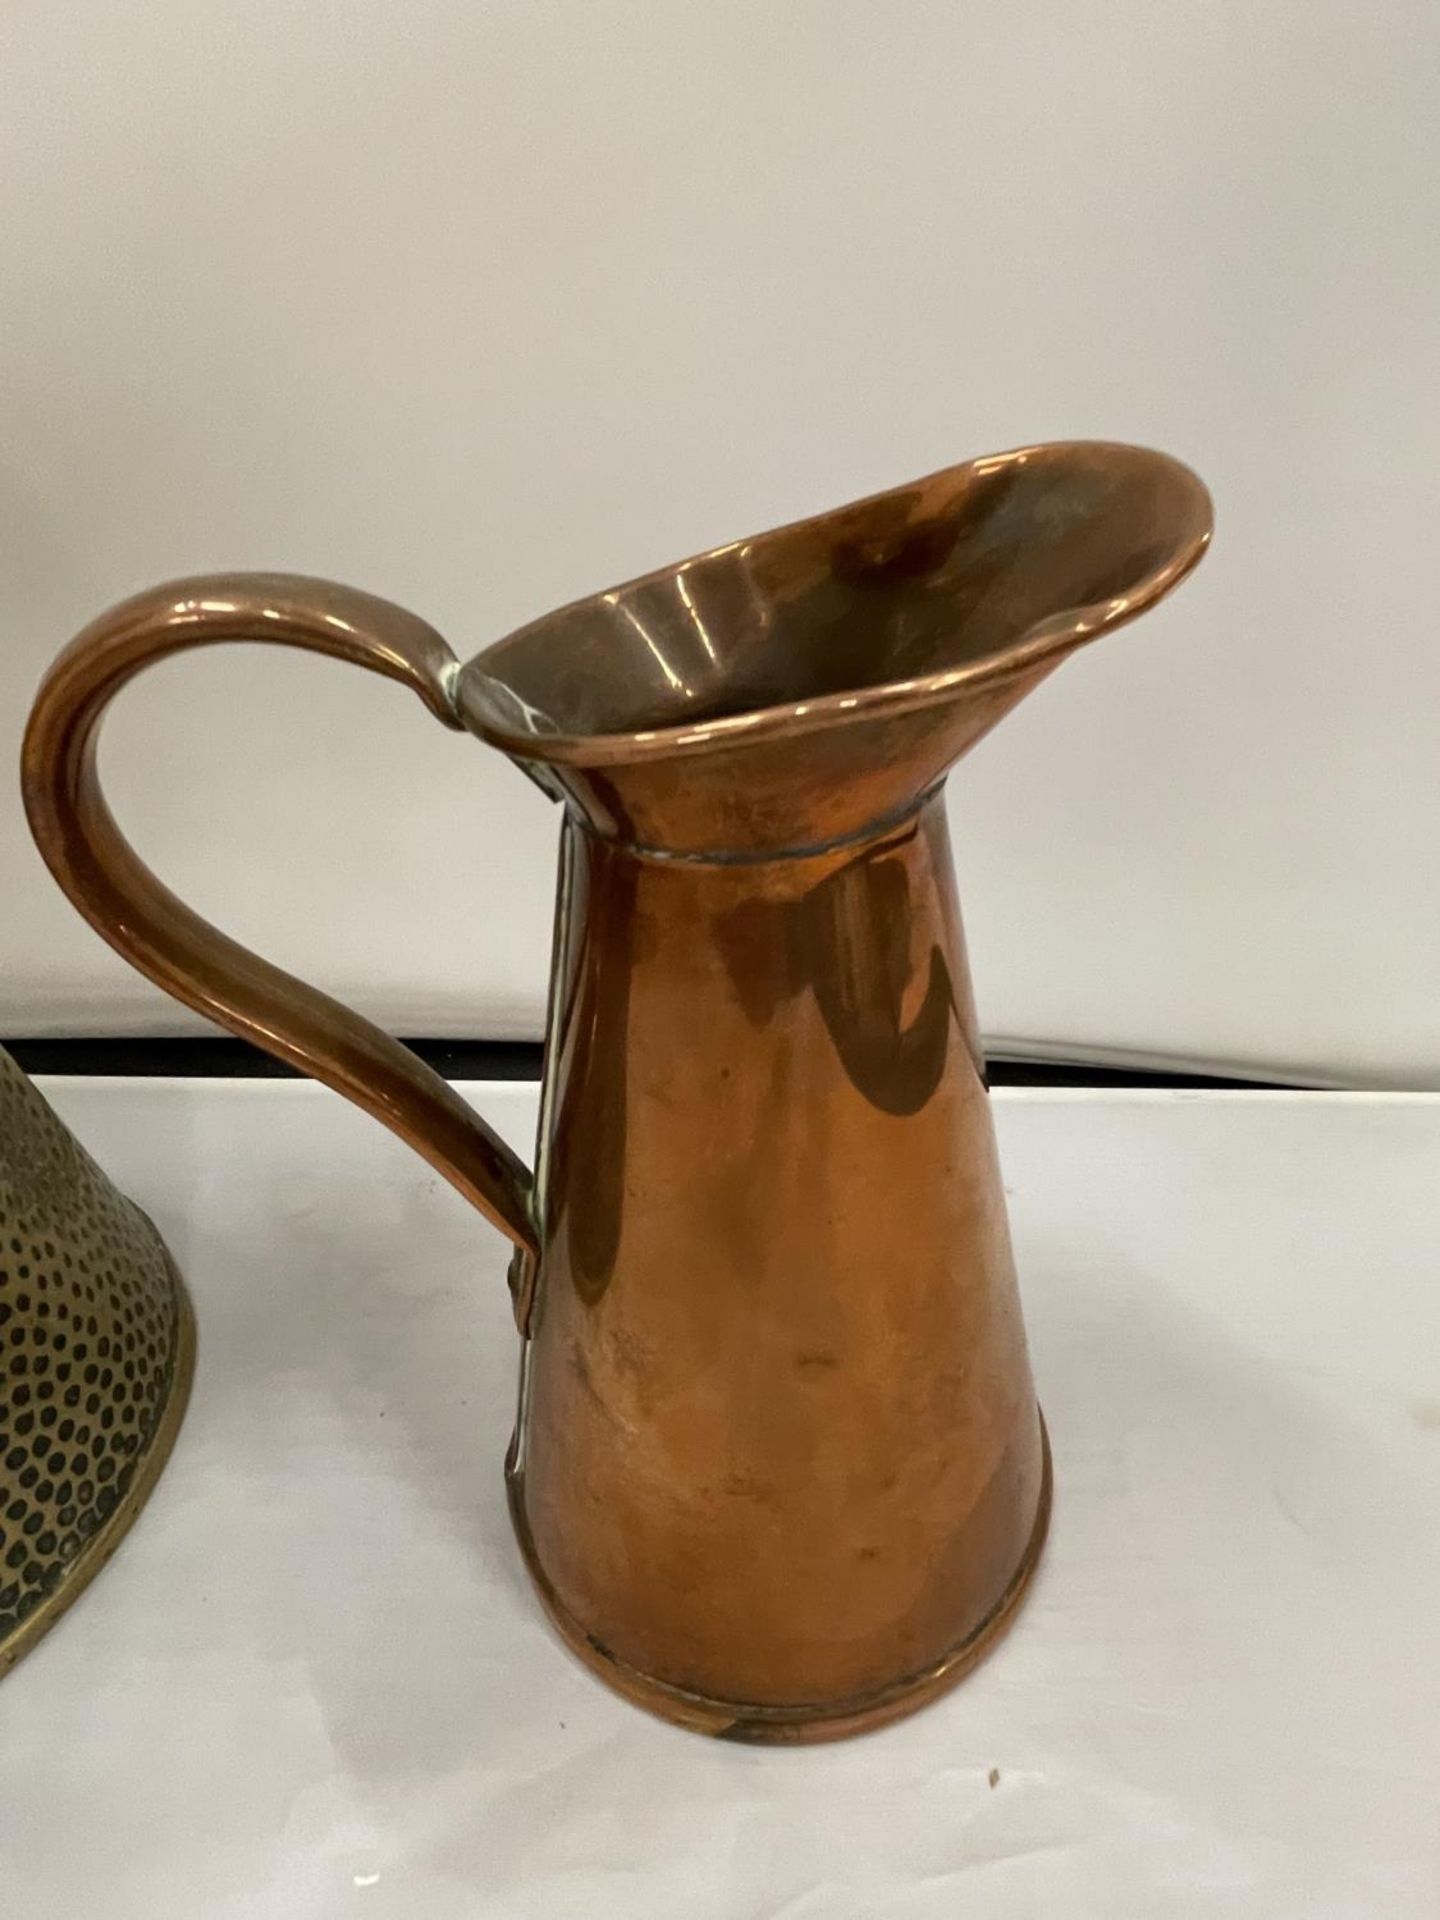 TWO JUGS BY JOSEPH SANKEY AND SONS ONE BEATEN BRASS AND ONE COPPER - Image 2 of 4